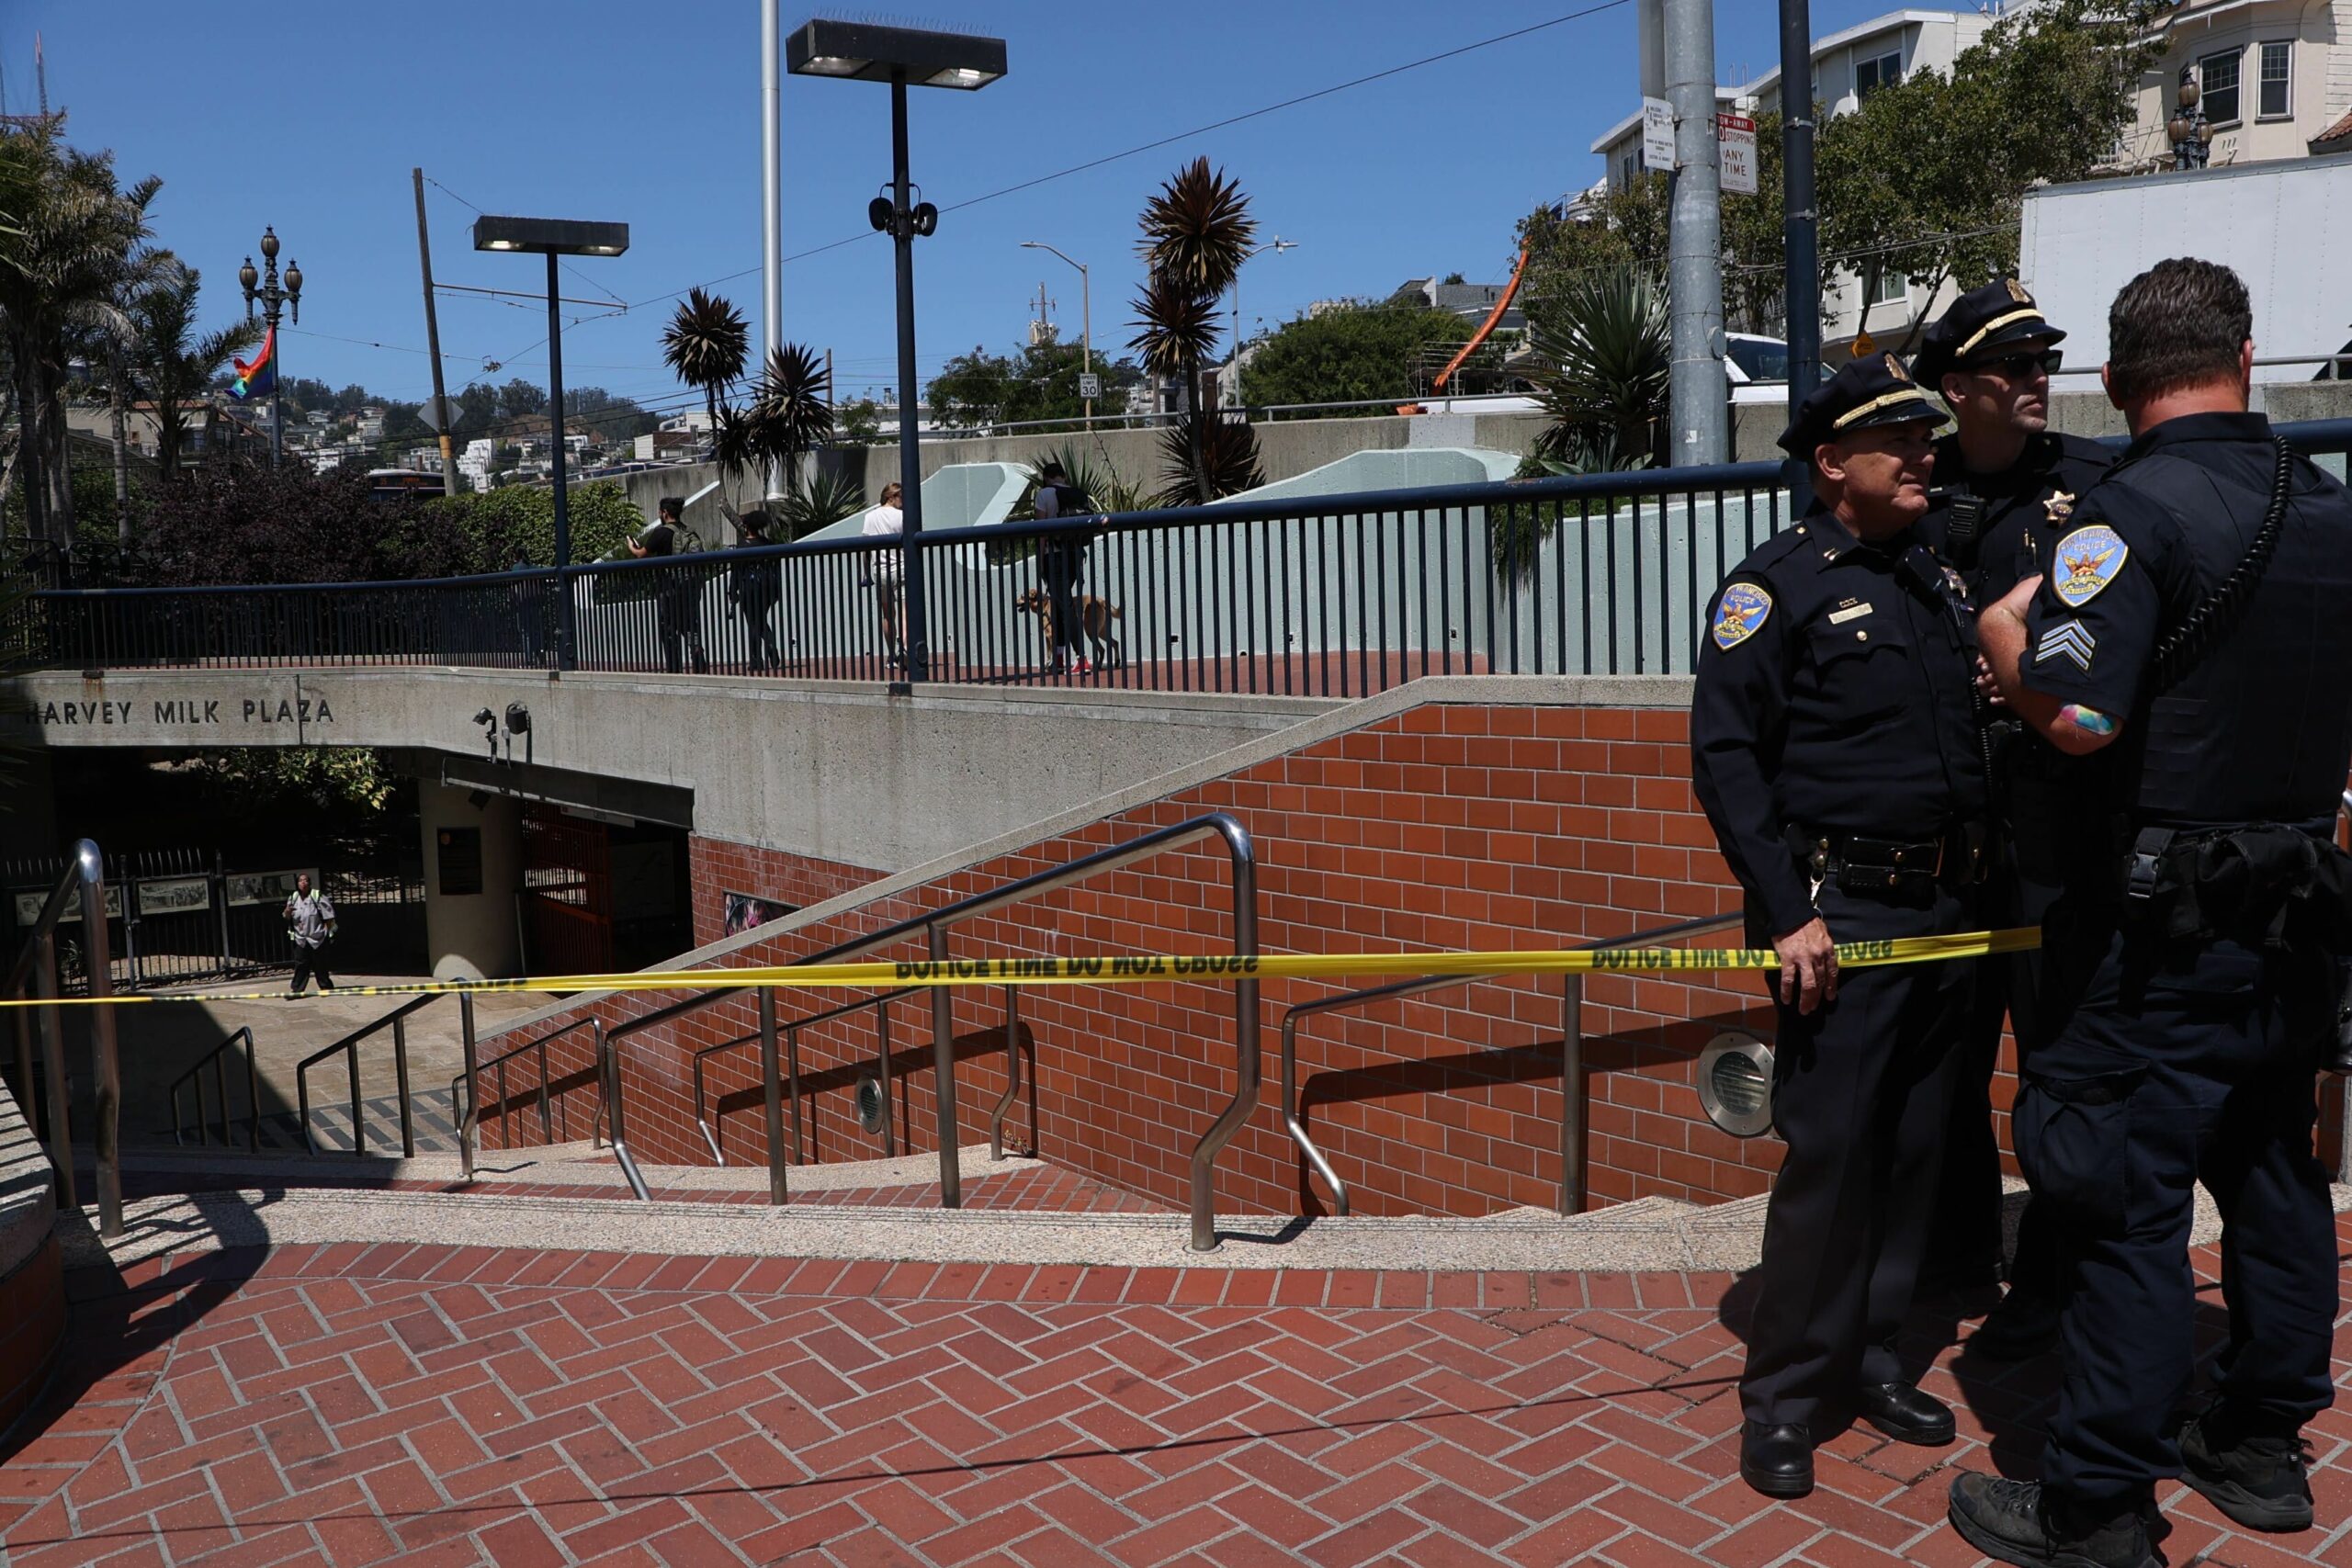 Two police officers stand by a taped-off urban area near a plaza entrance with palm trees and a clear sky.